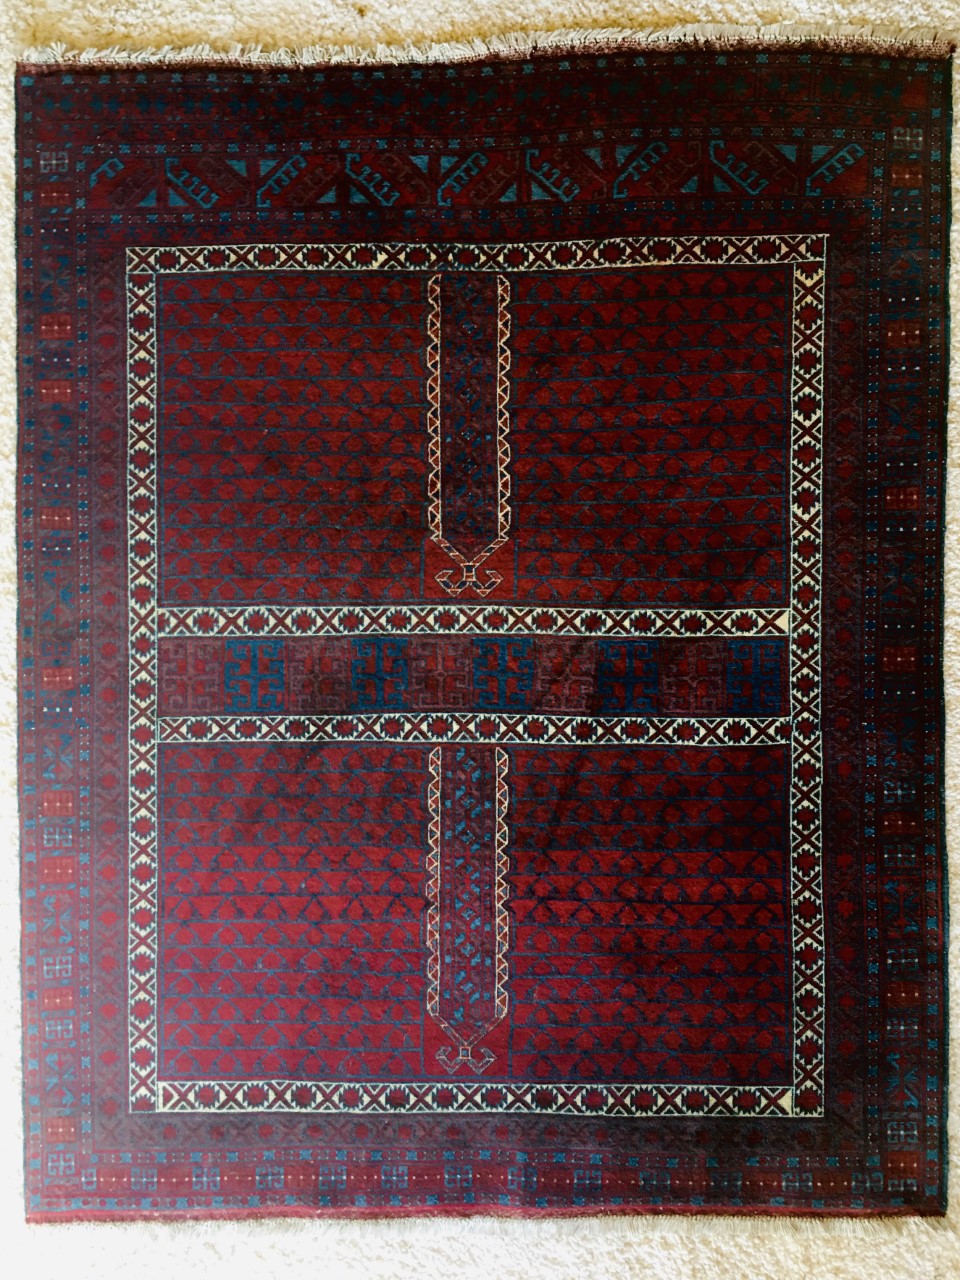 A red, blue, and white rug featuring multiple intricate patterns